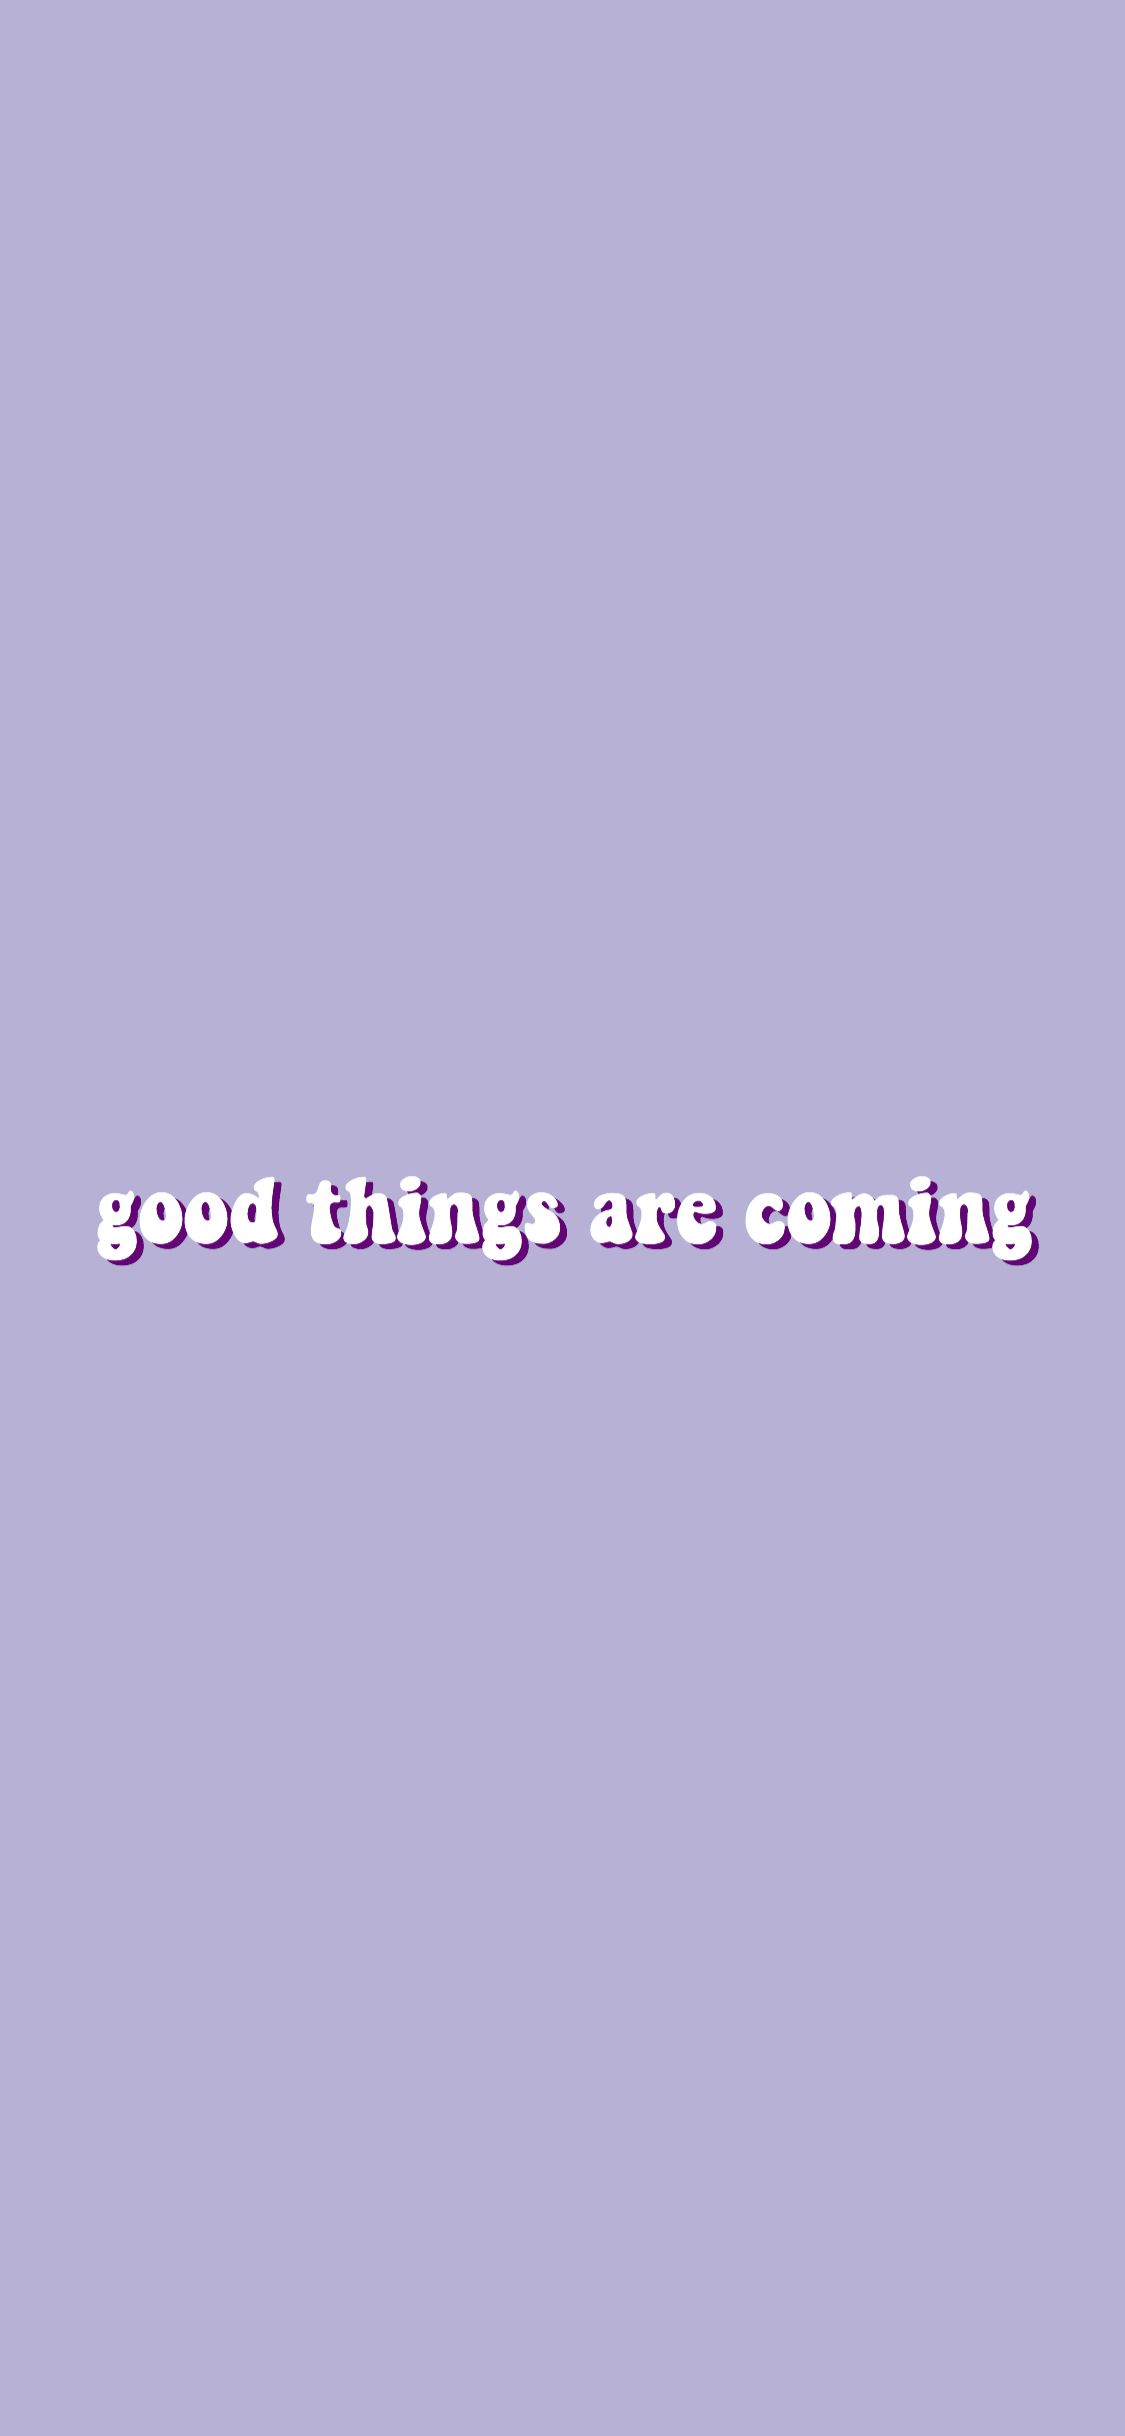 good things are coming wallpaper!. iPhone wallpaper yellow, Cartoon wallpaper, Pattern wallpaper